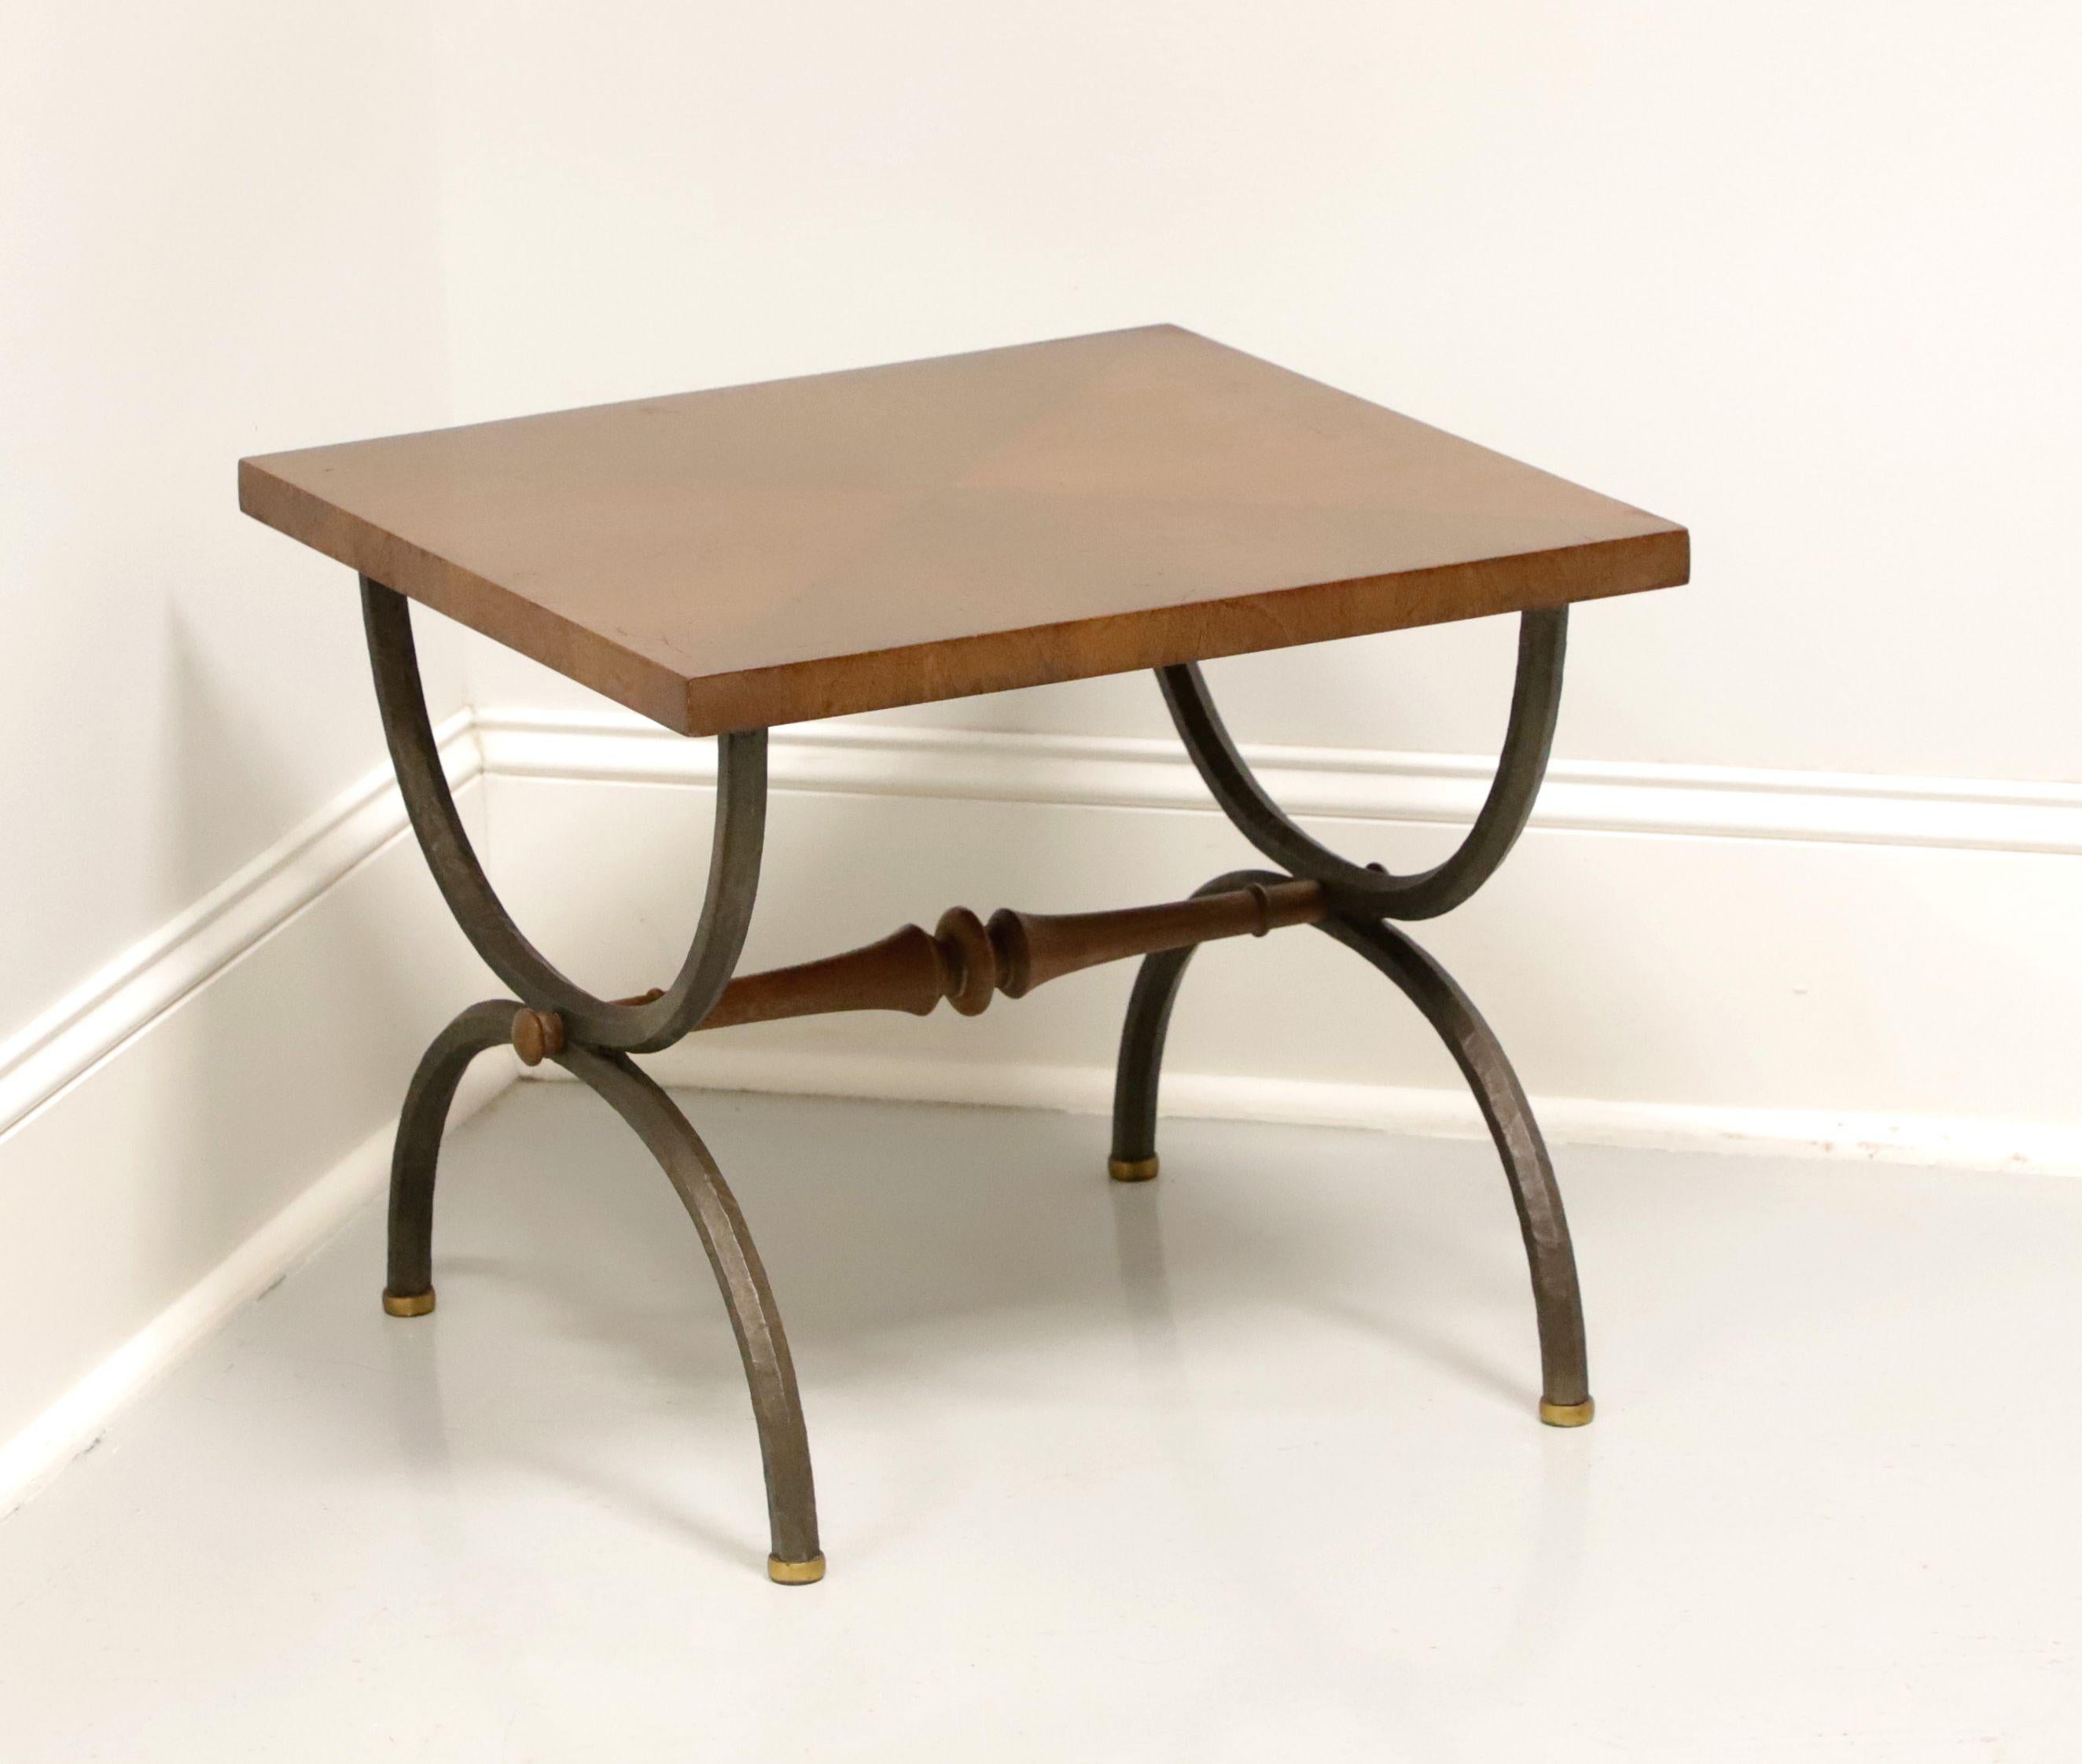 TOMLINSON 1960's Walnut Square Cocktail Table with Metal Legs - C 2